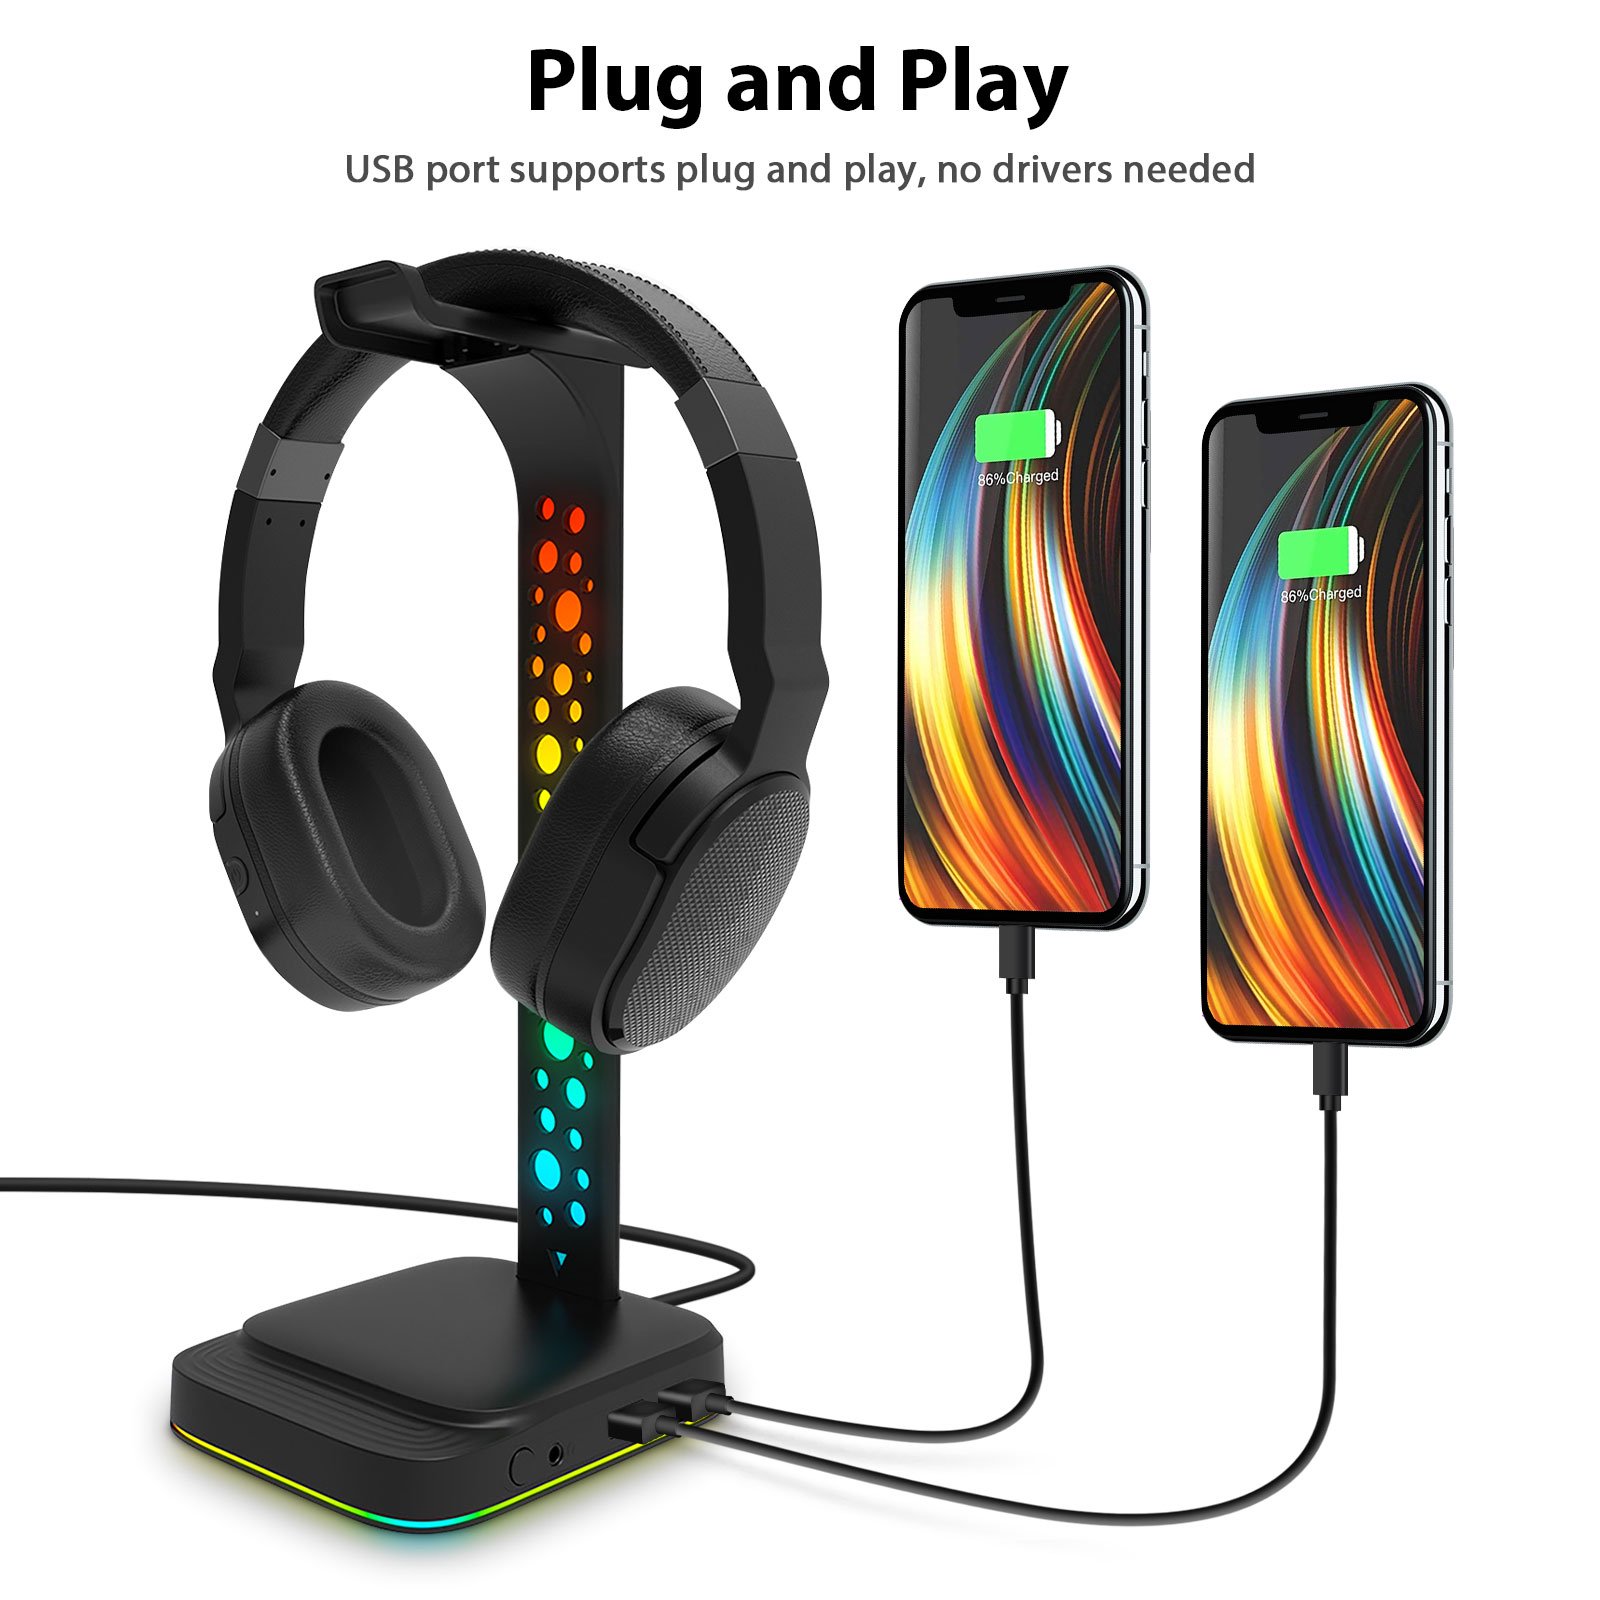 Headphones-Gaming-Headset-Stand-RGB-Headphone-Stand-with-3-5mm-AUX-2-USB-Charging-Ports-Headphone-Holder-with-10-Light-Modes-Gaming-Headset-for-Gamers-PC-34